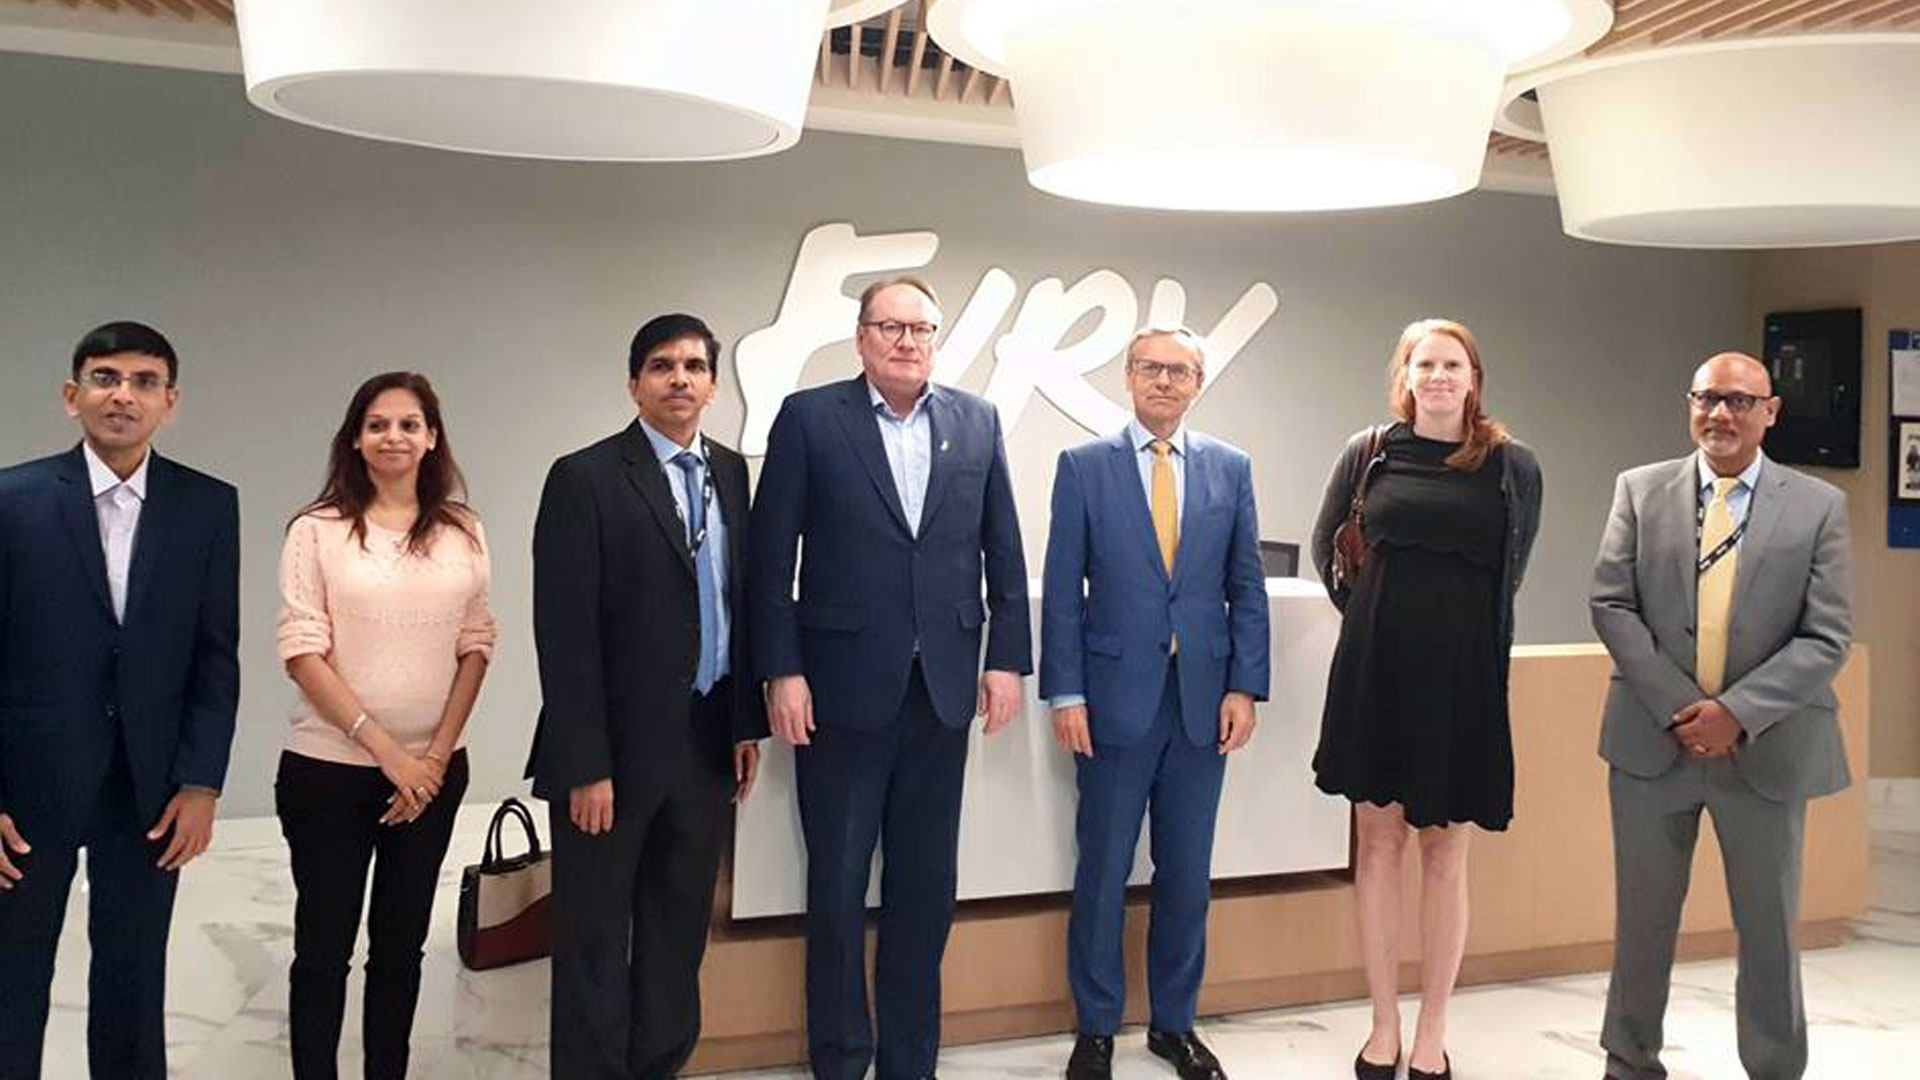 NORWAY’S AMBASSADOR TO INDIA VISITS EVRY IN BANGALORE